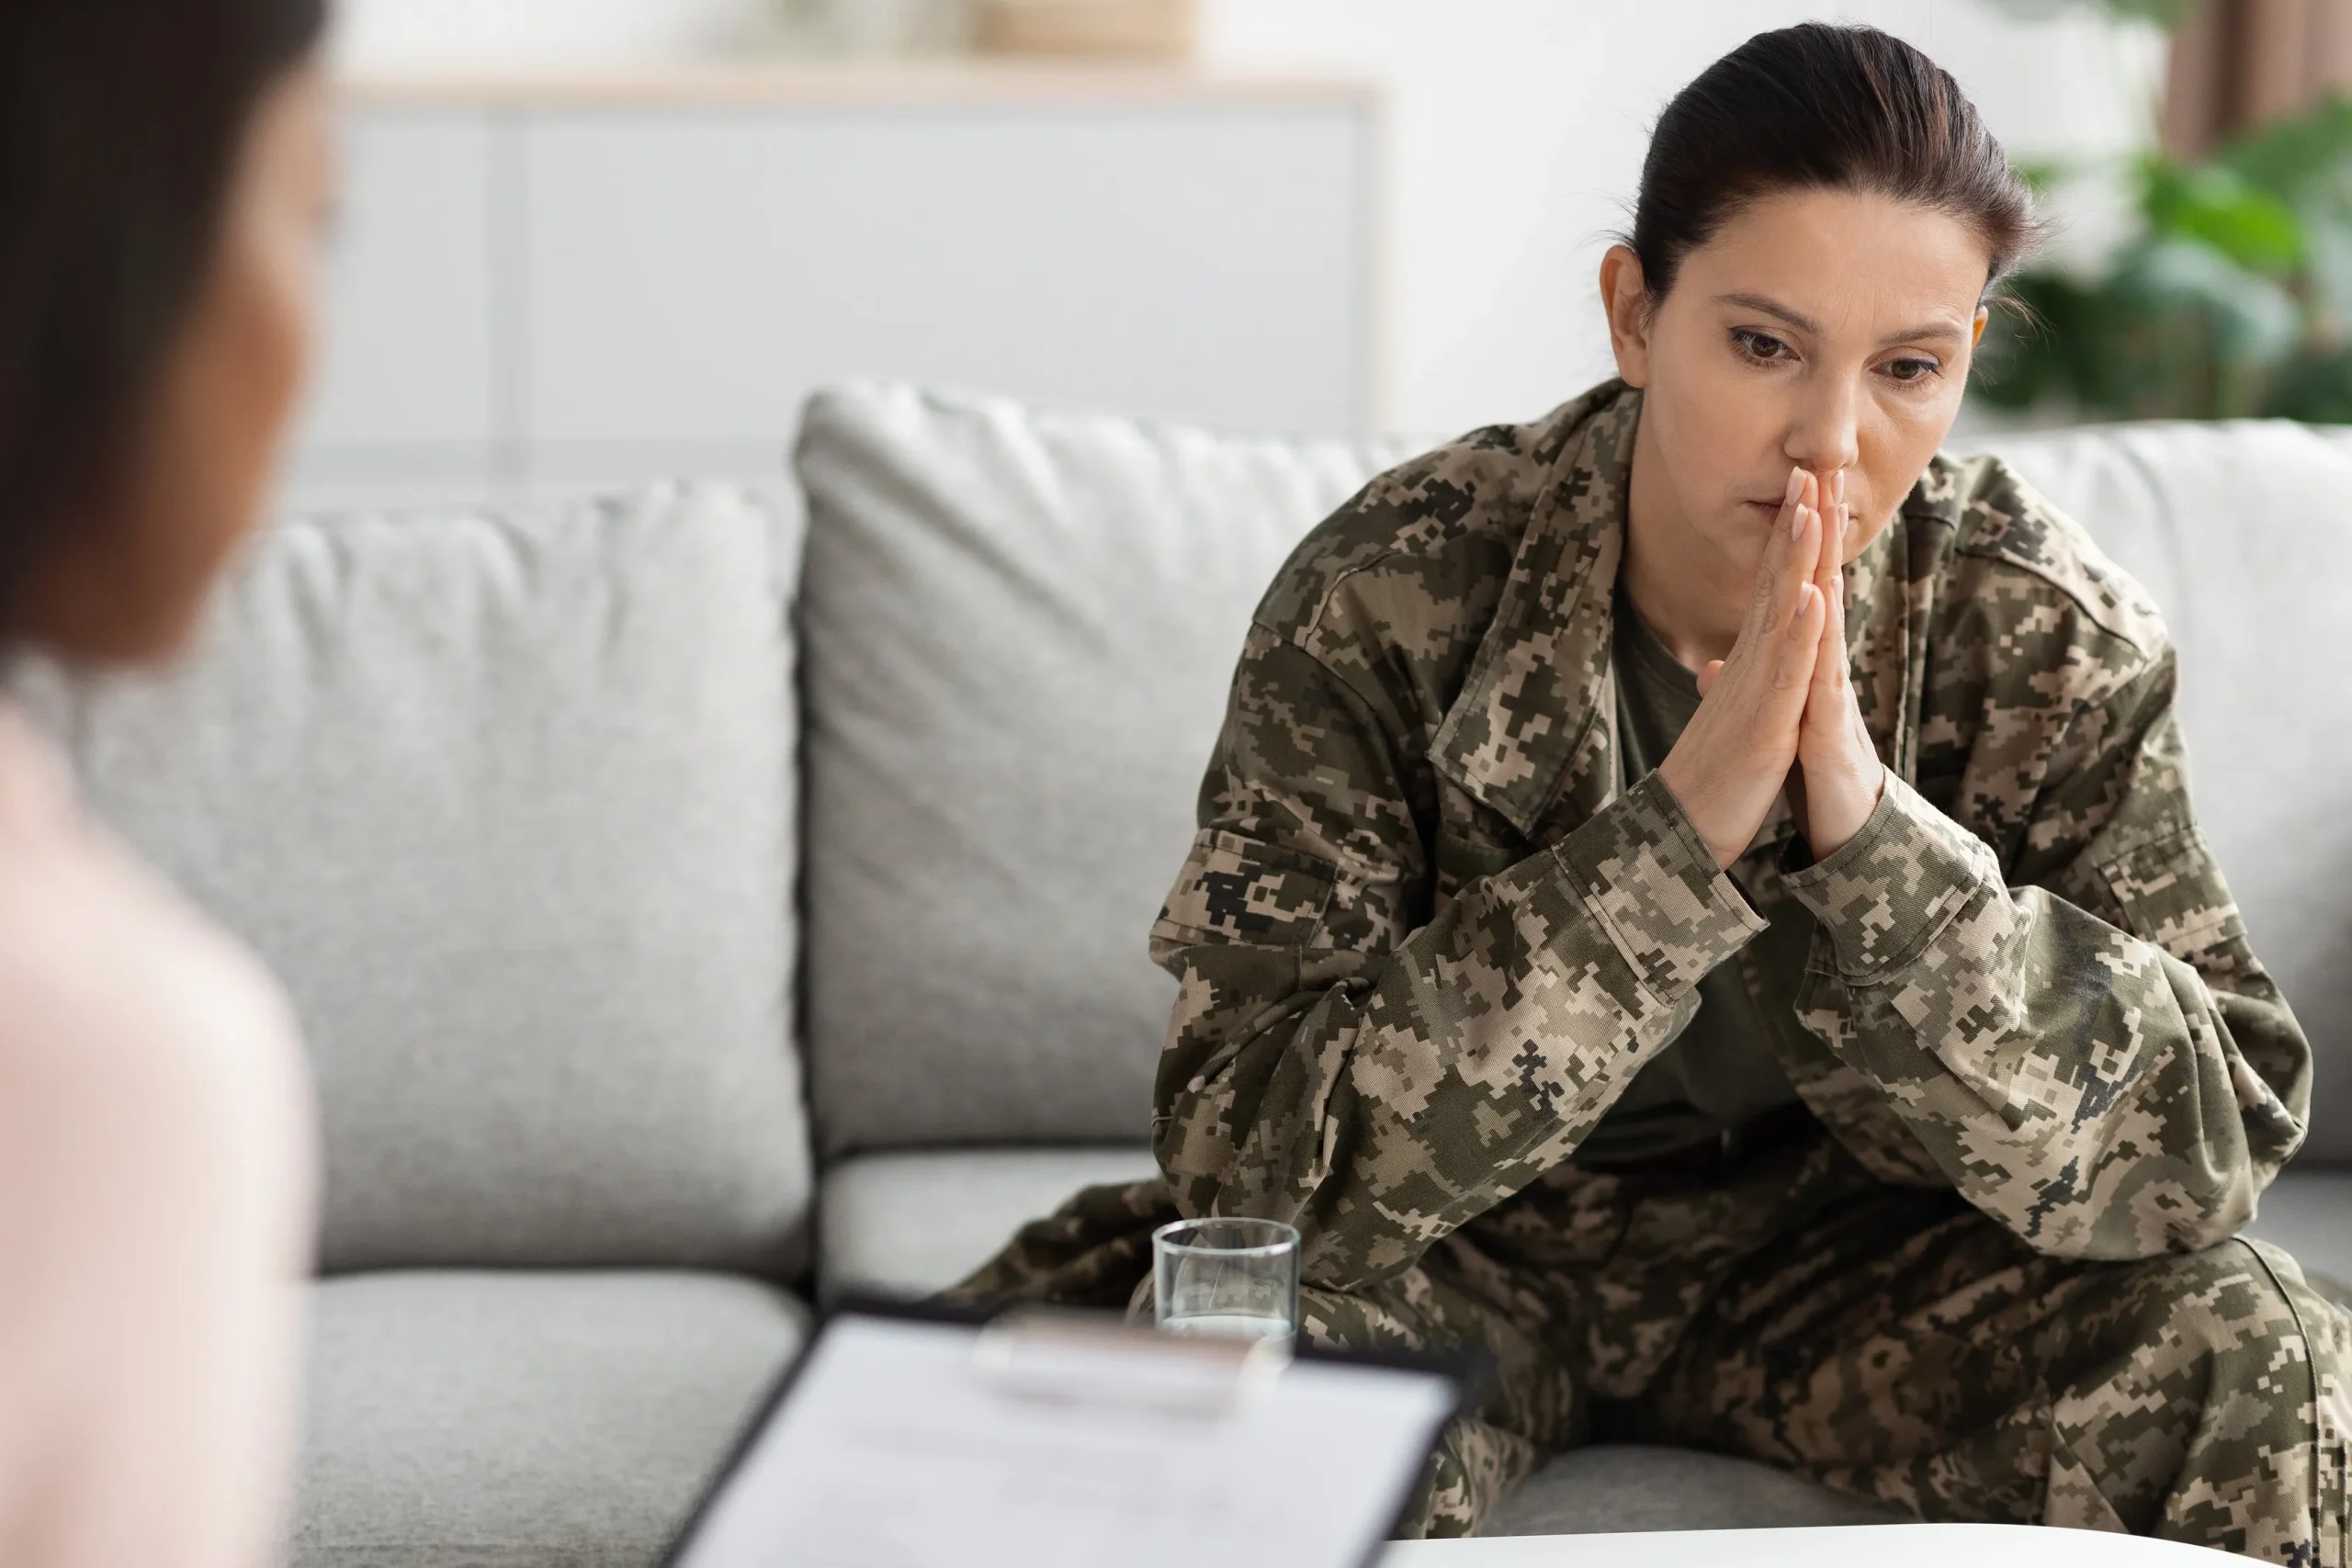 Military woman discussing her divorce with a therapist.